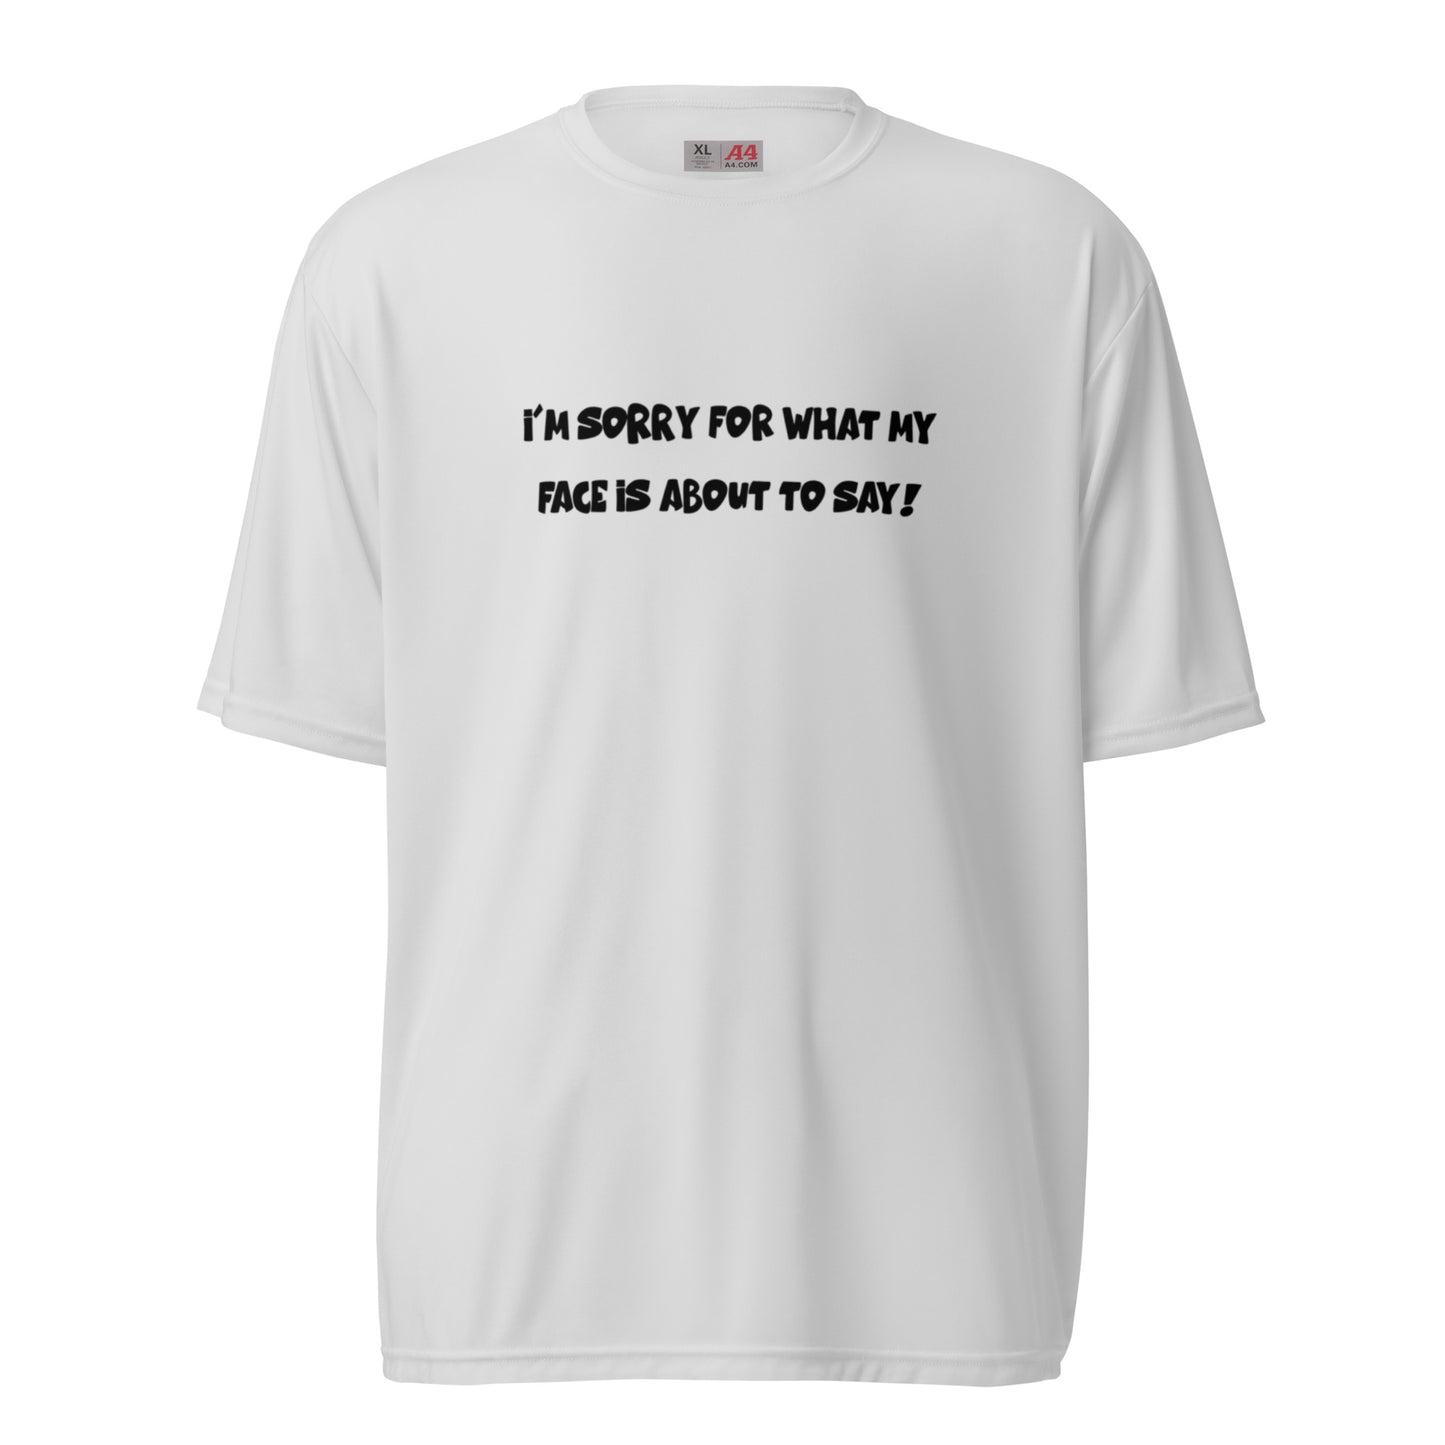 Sorry For My Face Unisex performance crew neck t-shirt - Black Print